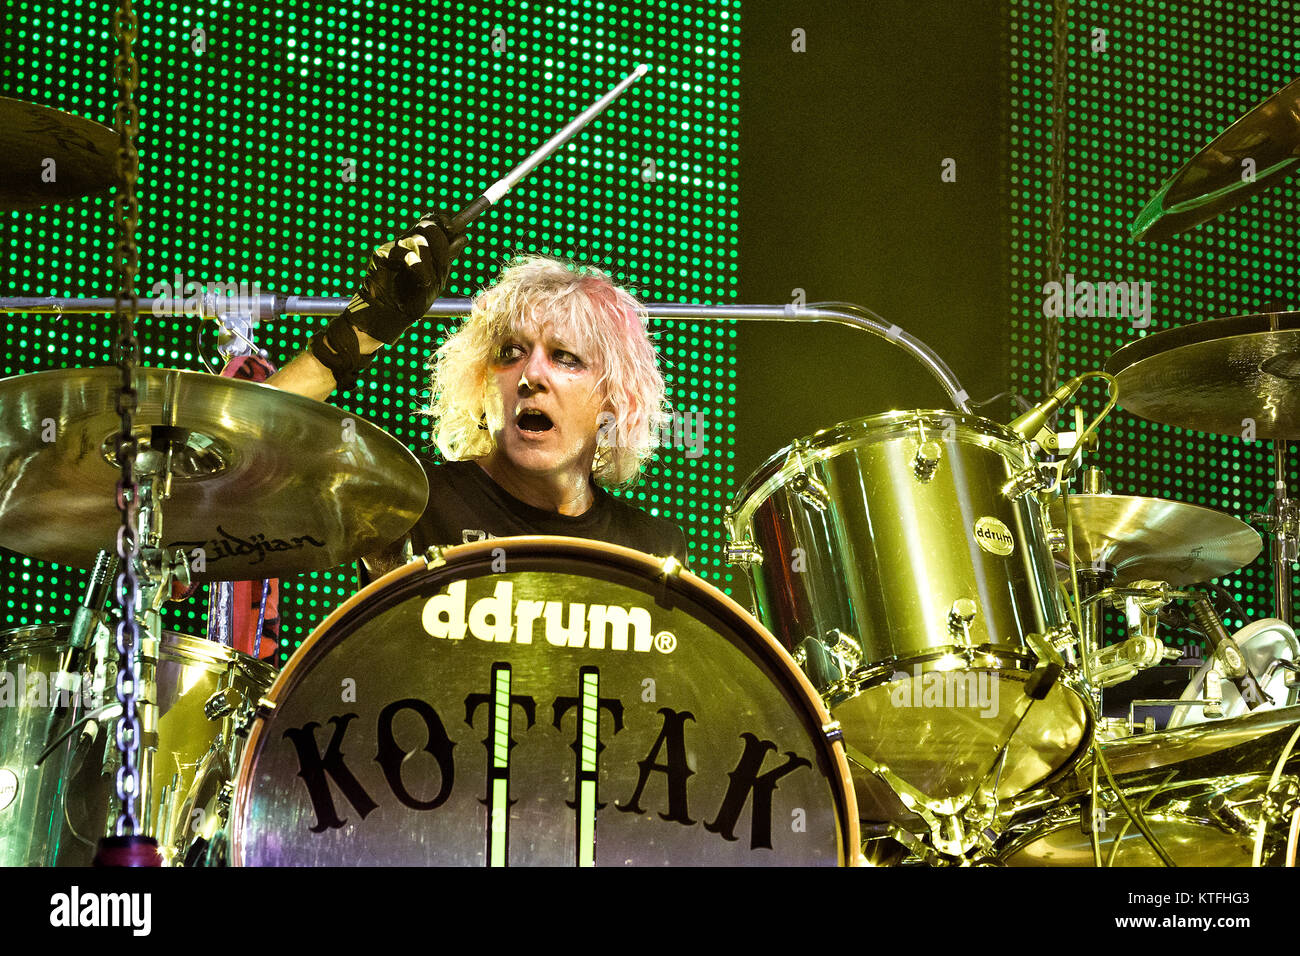 The German rock band Scorpions performs a live concert at Telenor Arena in Oslo. Here musician James Kottak on drums is seen live on stage. Norway, 10/12 2012. Stock Photo